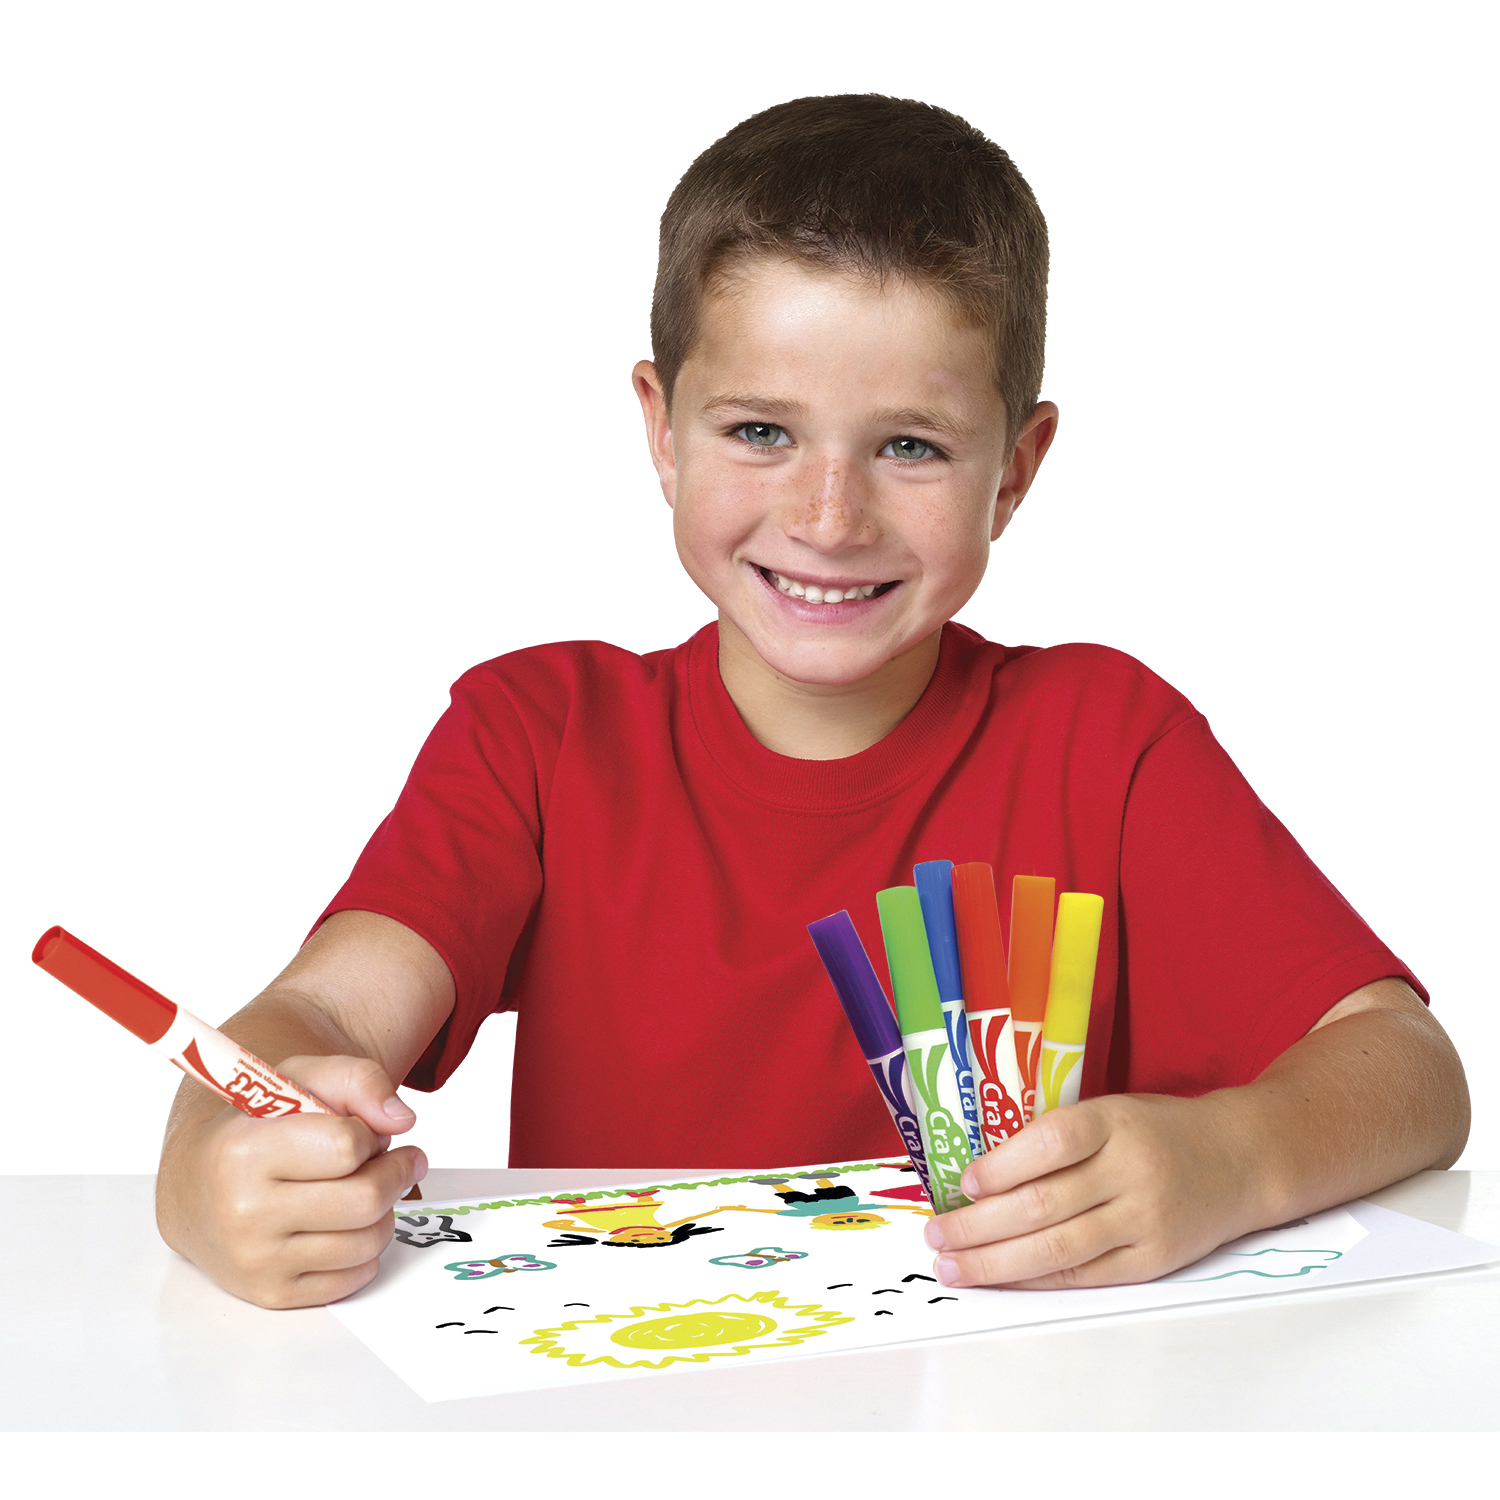 Cra-Z-Art Markers and Crayons from Cra-Z-Art 